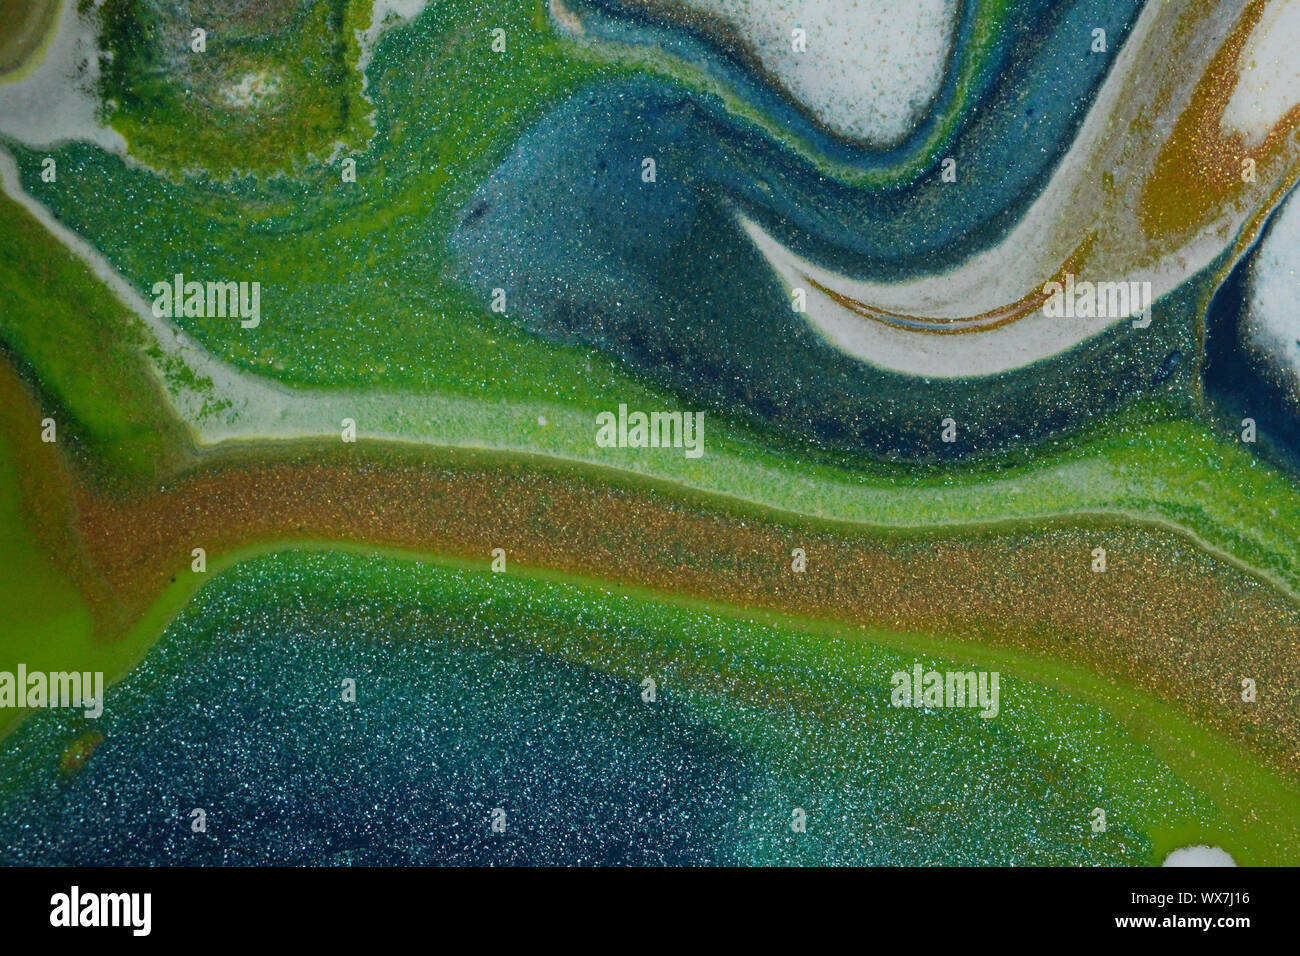 Neon green, glittery gold, glitter teal, white, and dark blue combine to create this abstract overhead view of islands in the ocean for backgrounds. Stock Photo